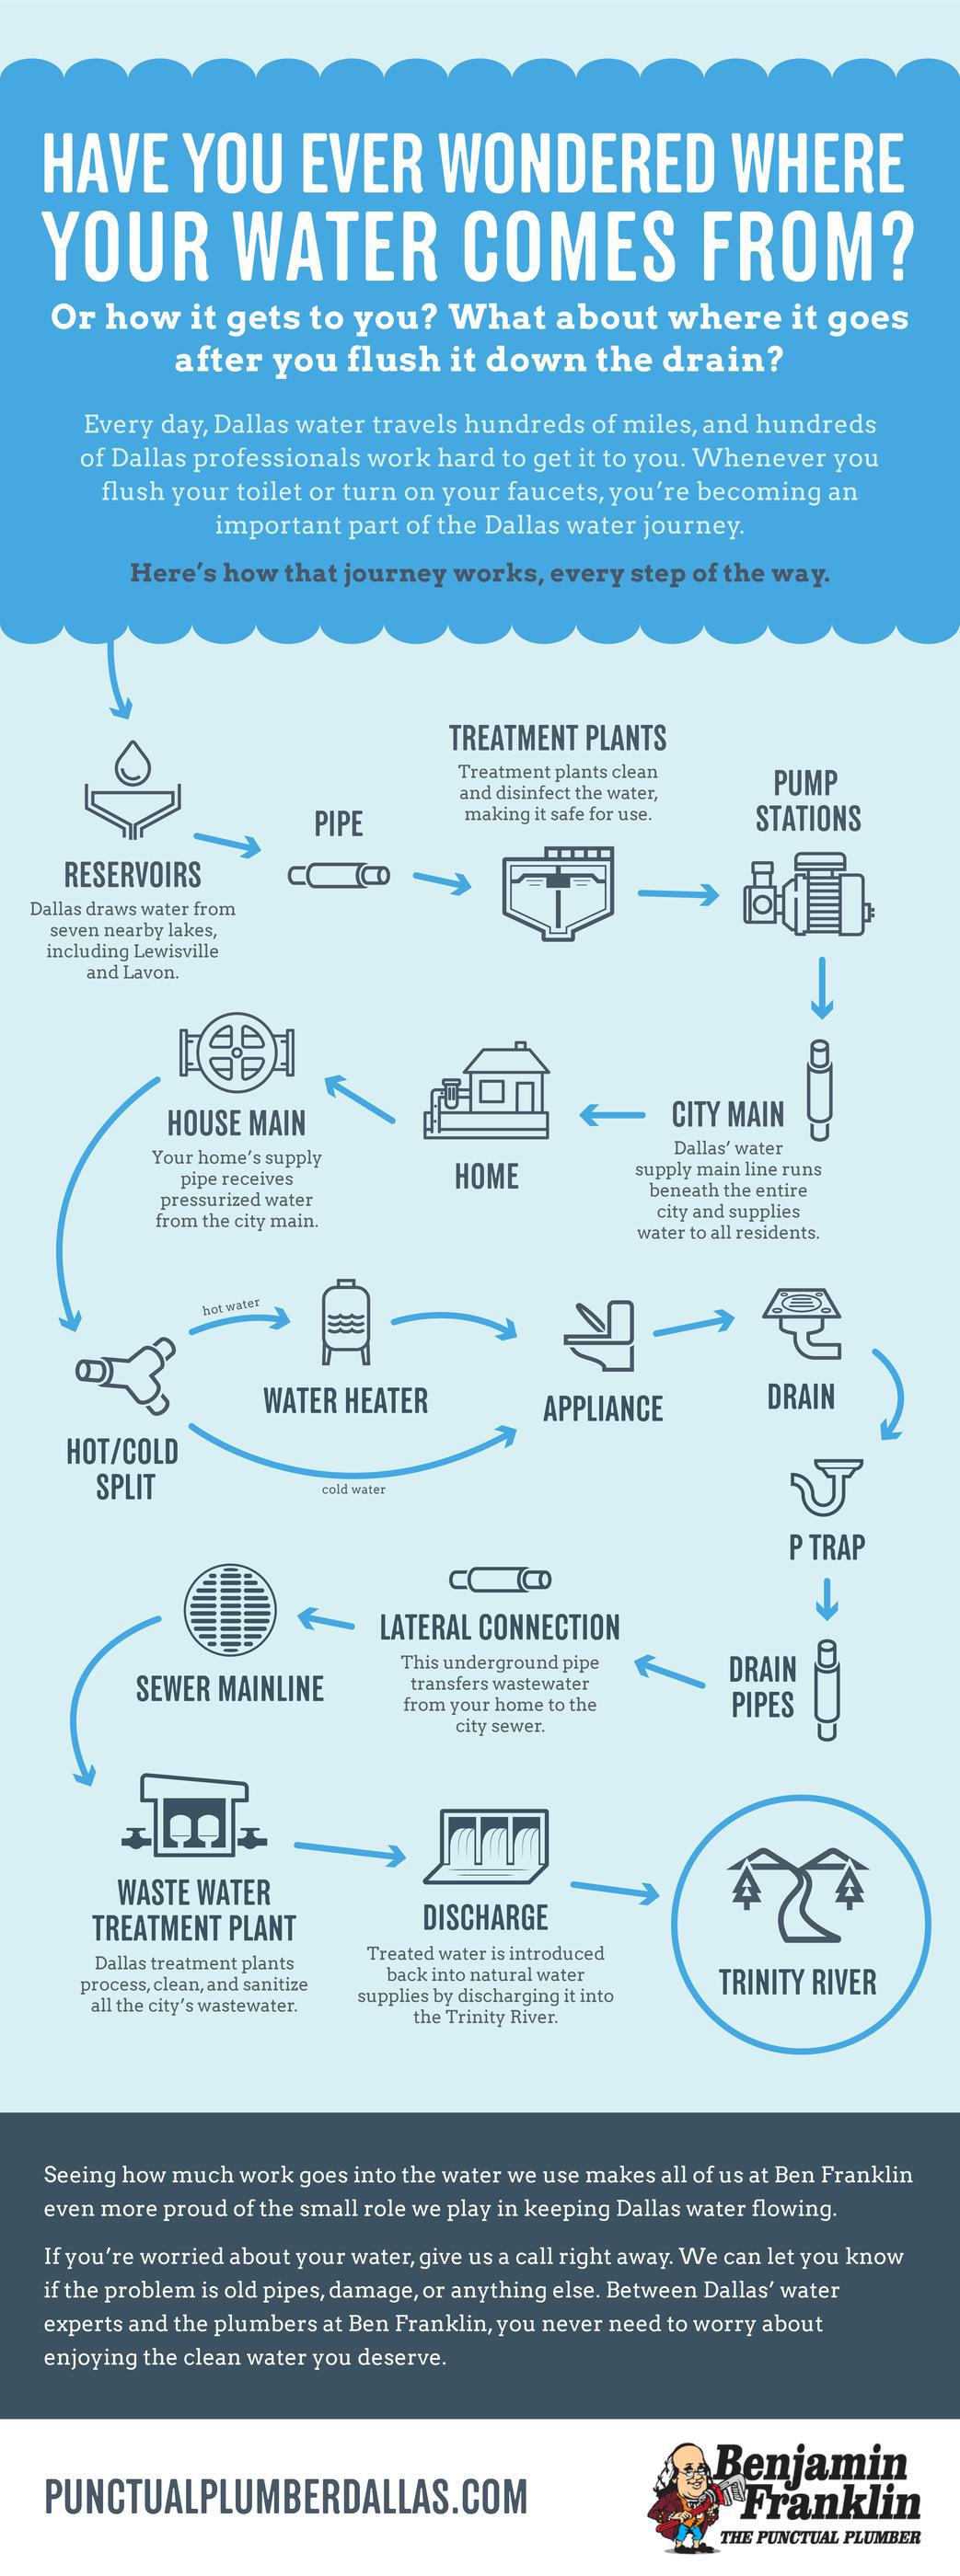 BFP-Dallas Water Infographic